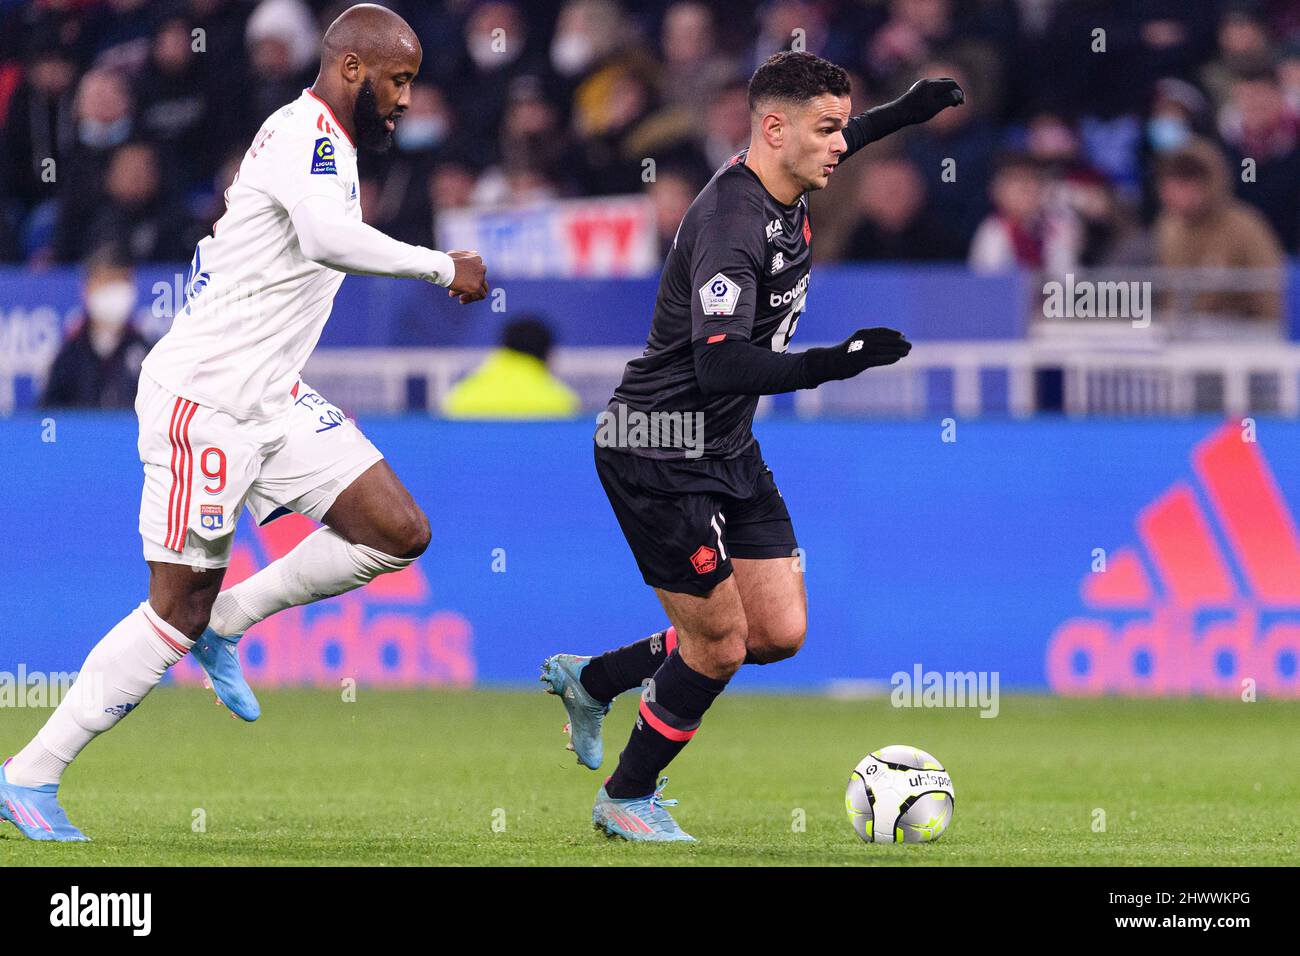 Lyon, France - February 27: Hatem Ben Arfa of Lille (R) is chased by Moussa Dembele of Lyon (L) during the Ligue 1 Uber Eats match between Olympique L Stock Photo